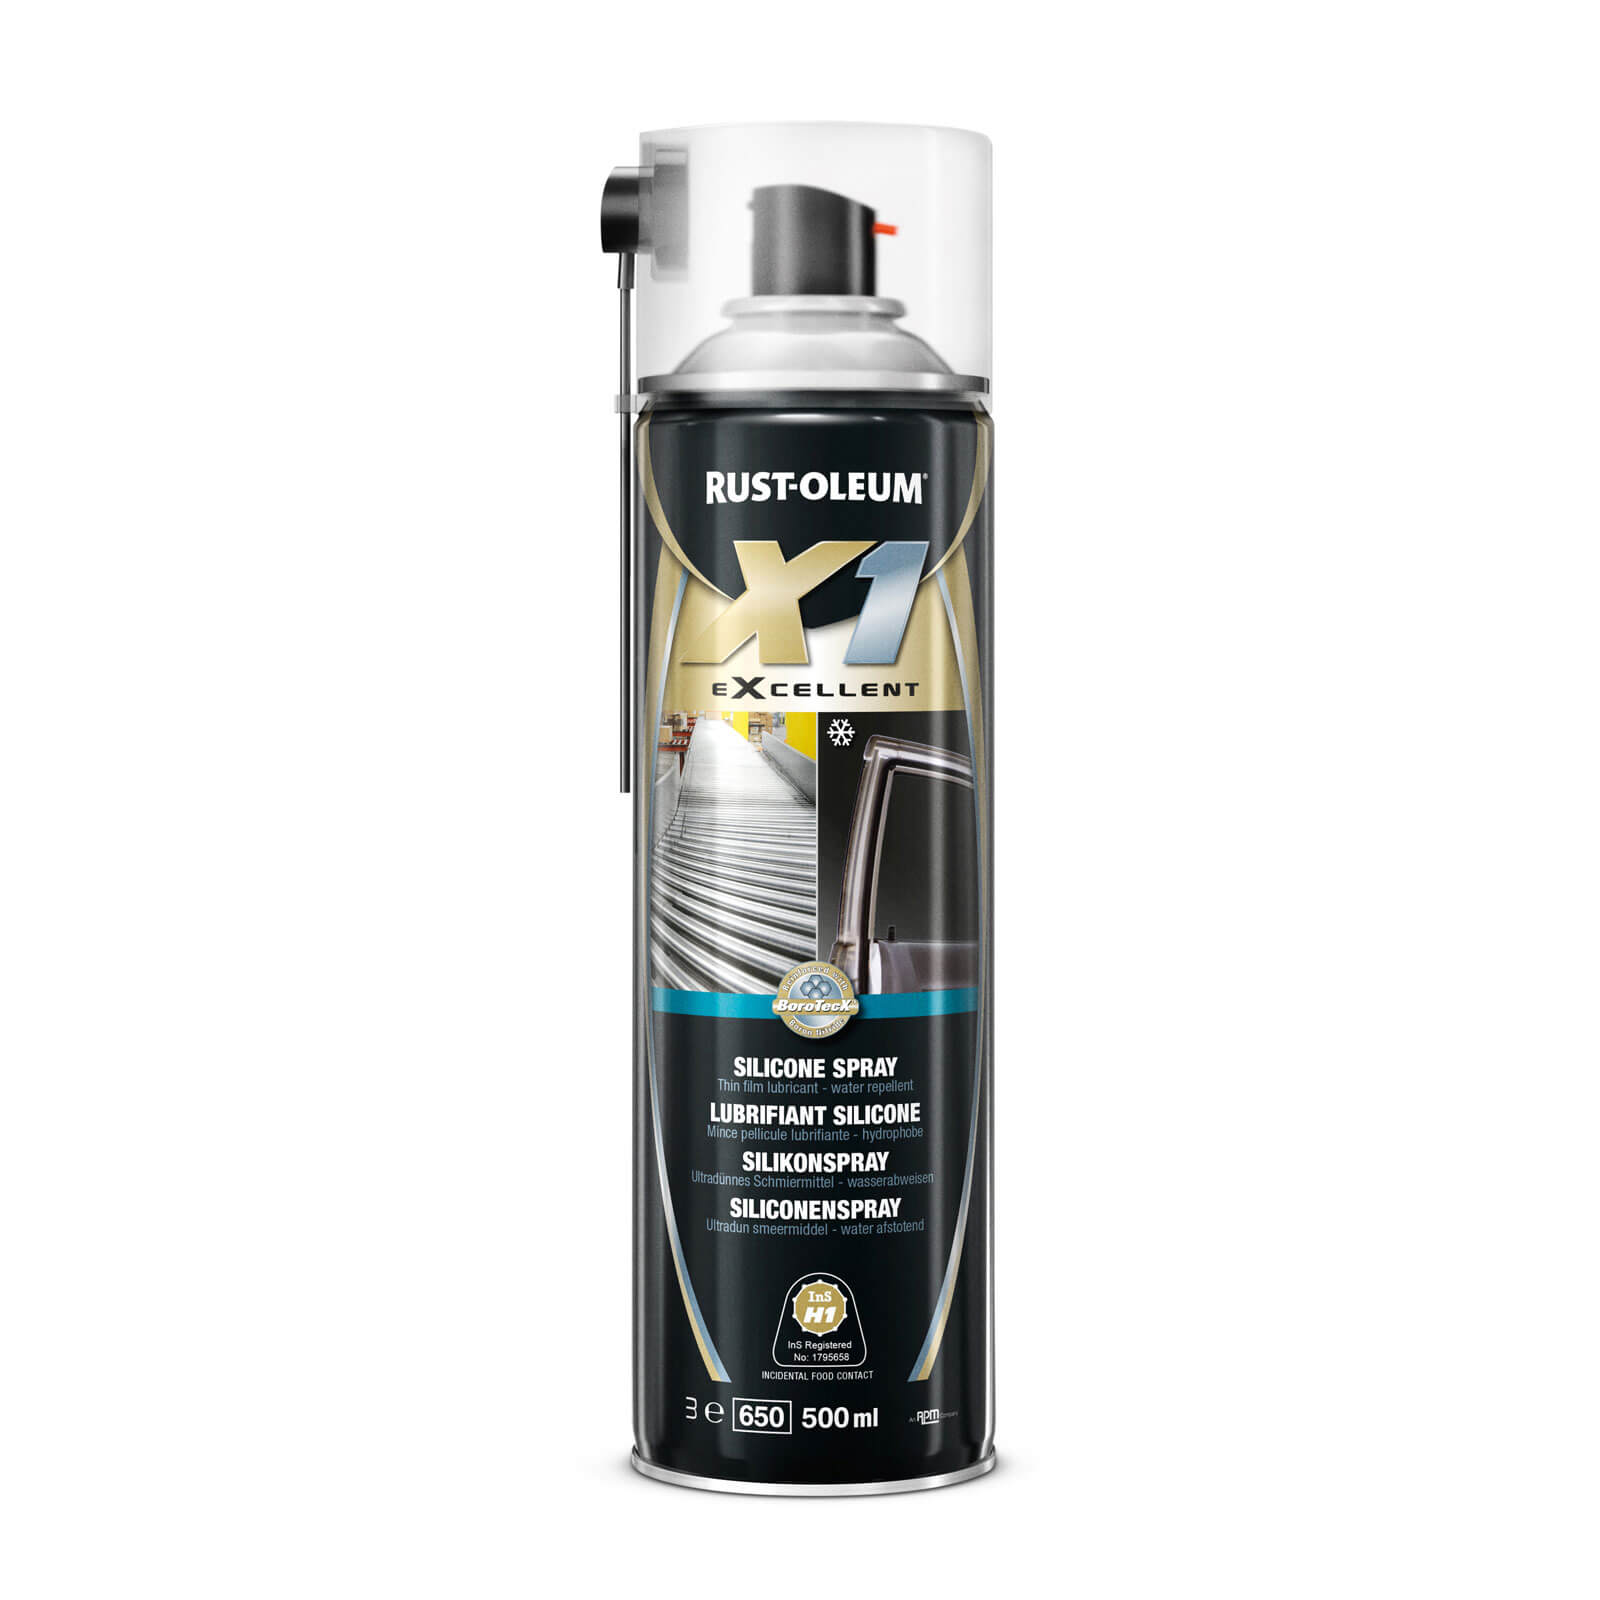 Photos - Car Service Station Equipment Rust Oleum X1 eXcellent Silicone Lubricating Spray 500ml 1615